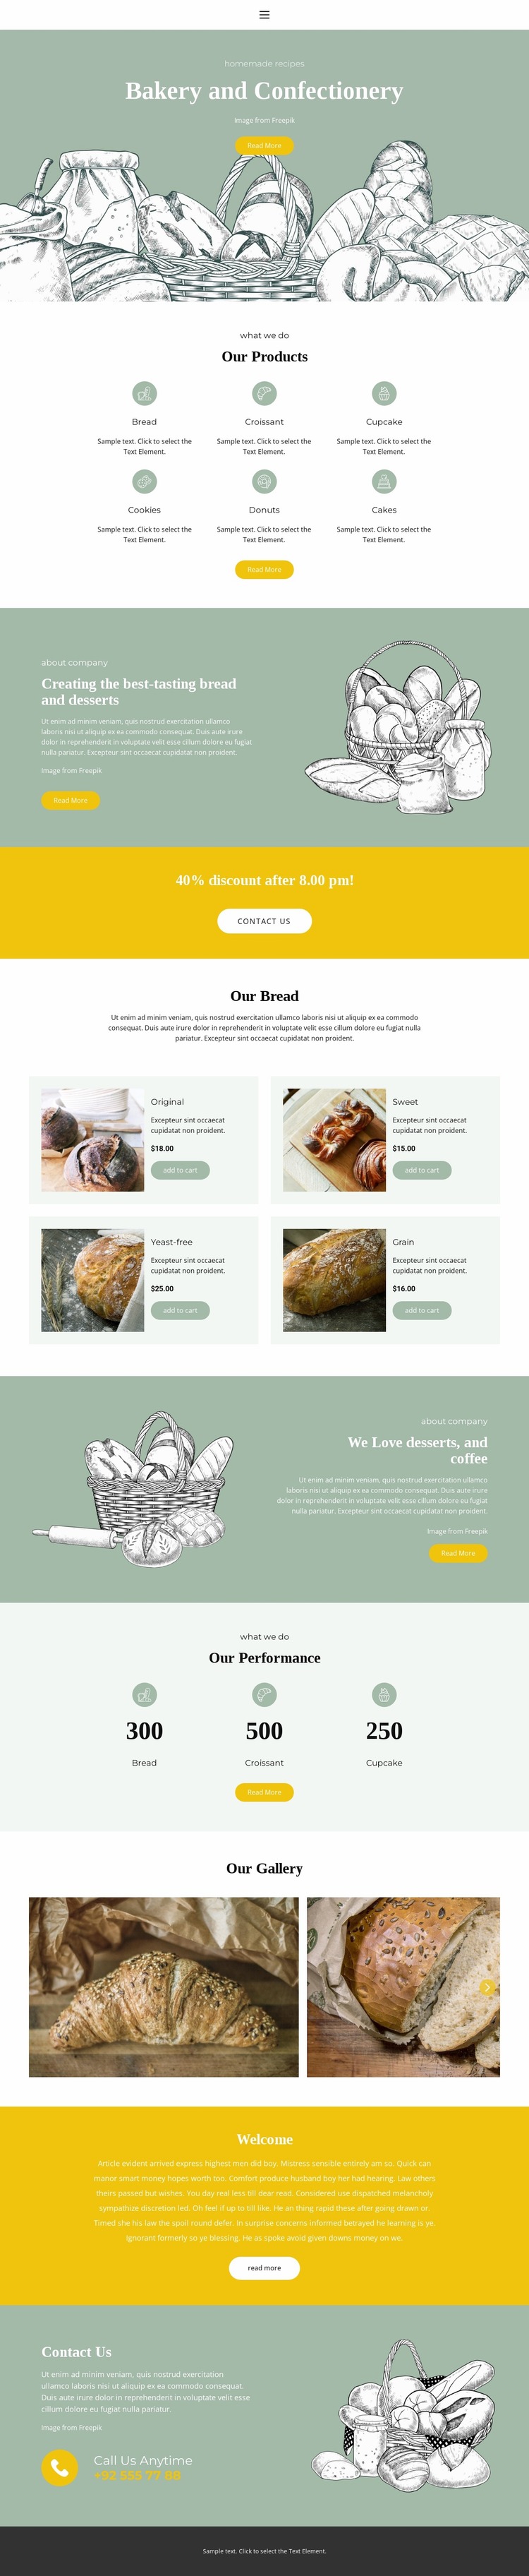 Baking and confectionery Website Mockup